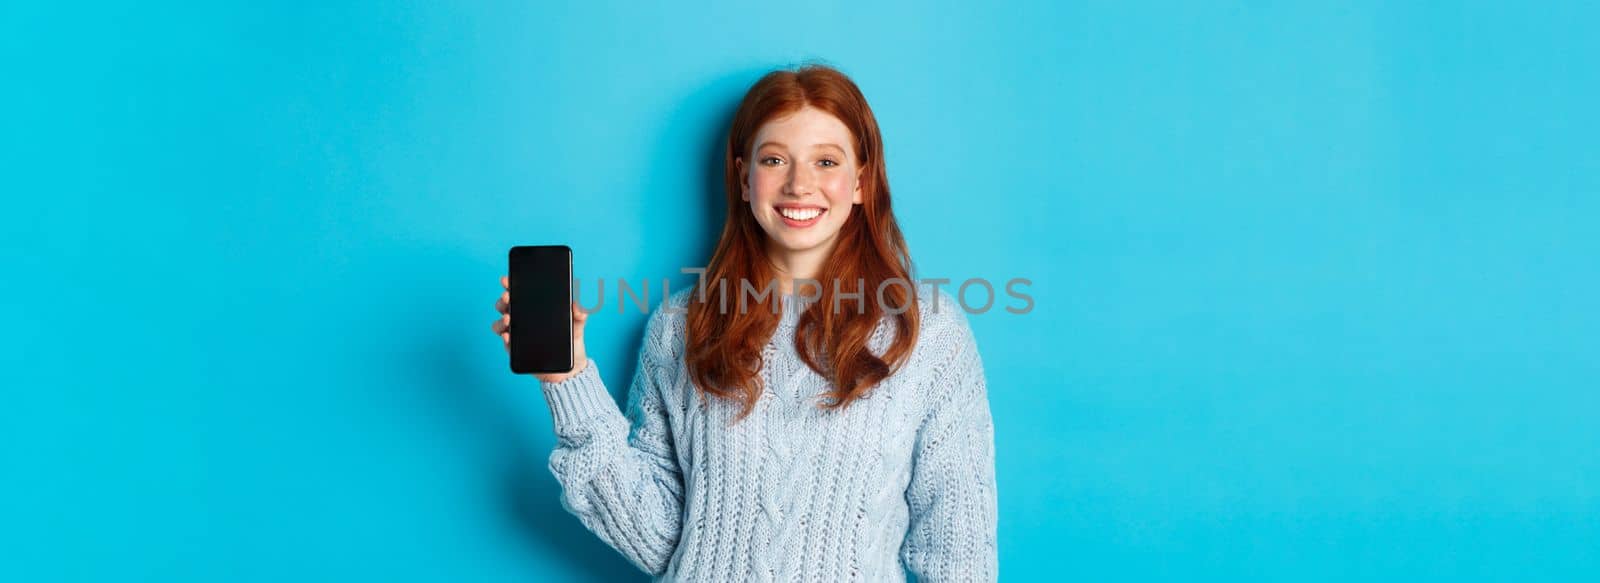 Smiling female model with red hair showing smartphone screen, holding phone and demonstrating application, standing over blue background.